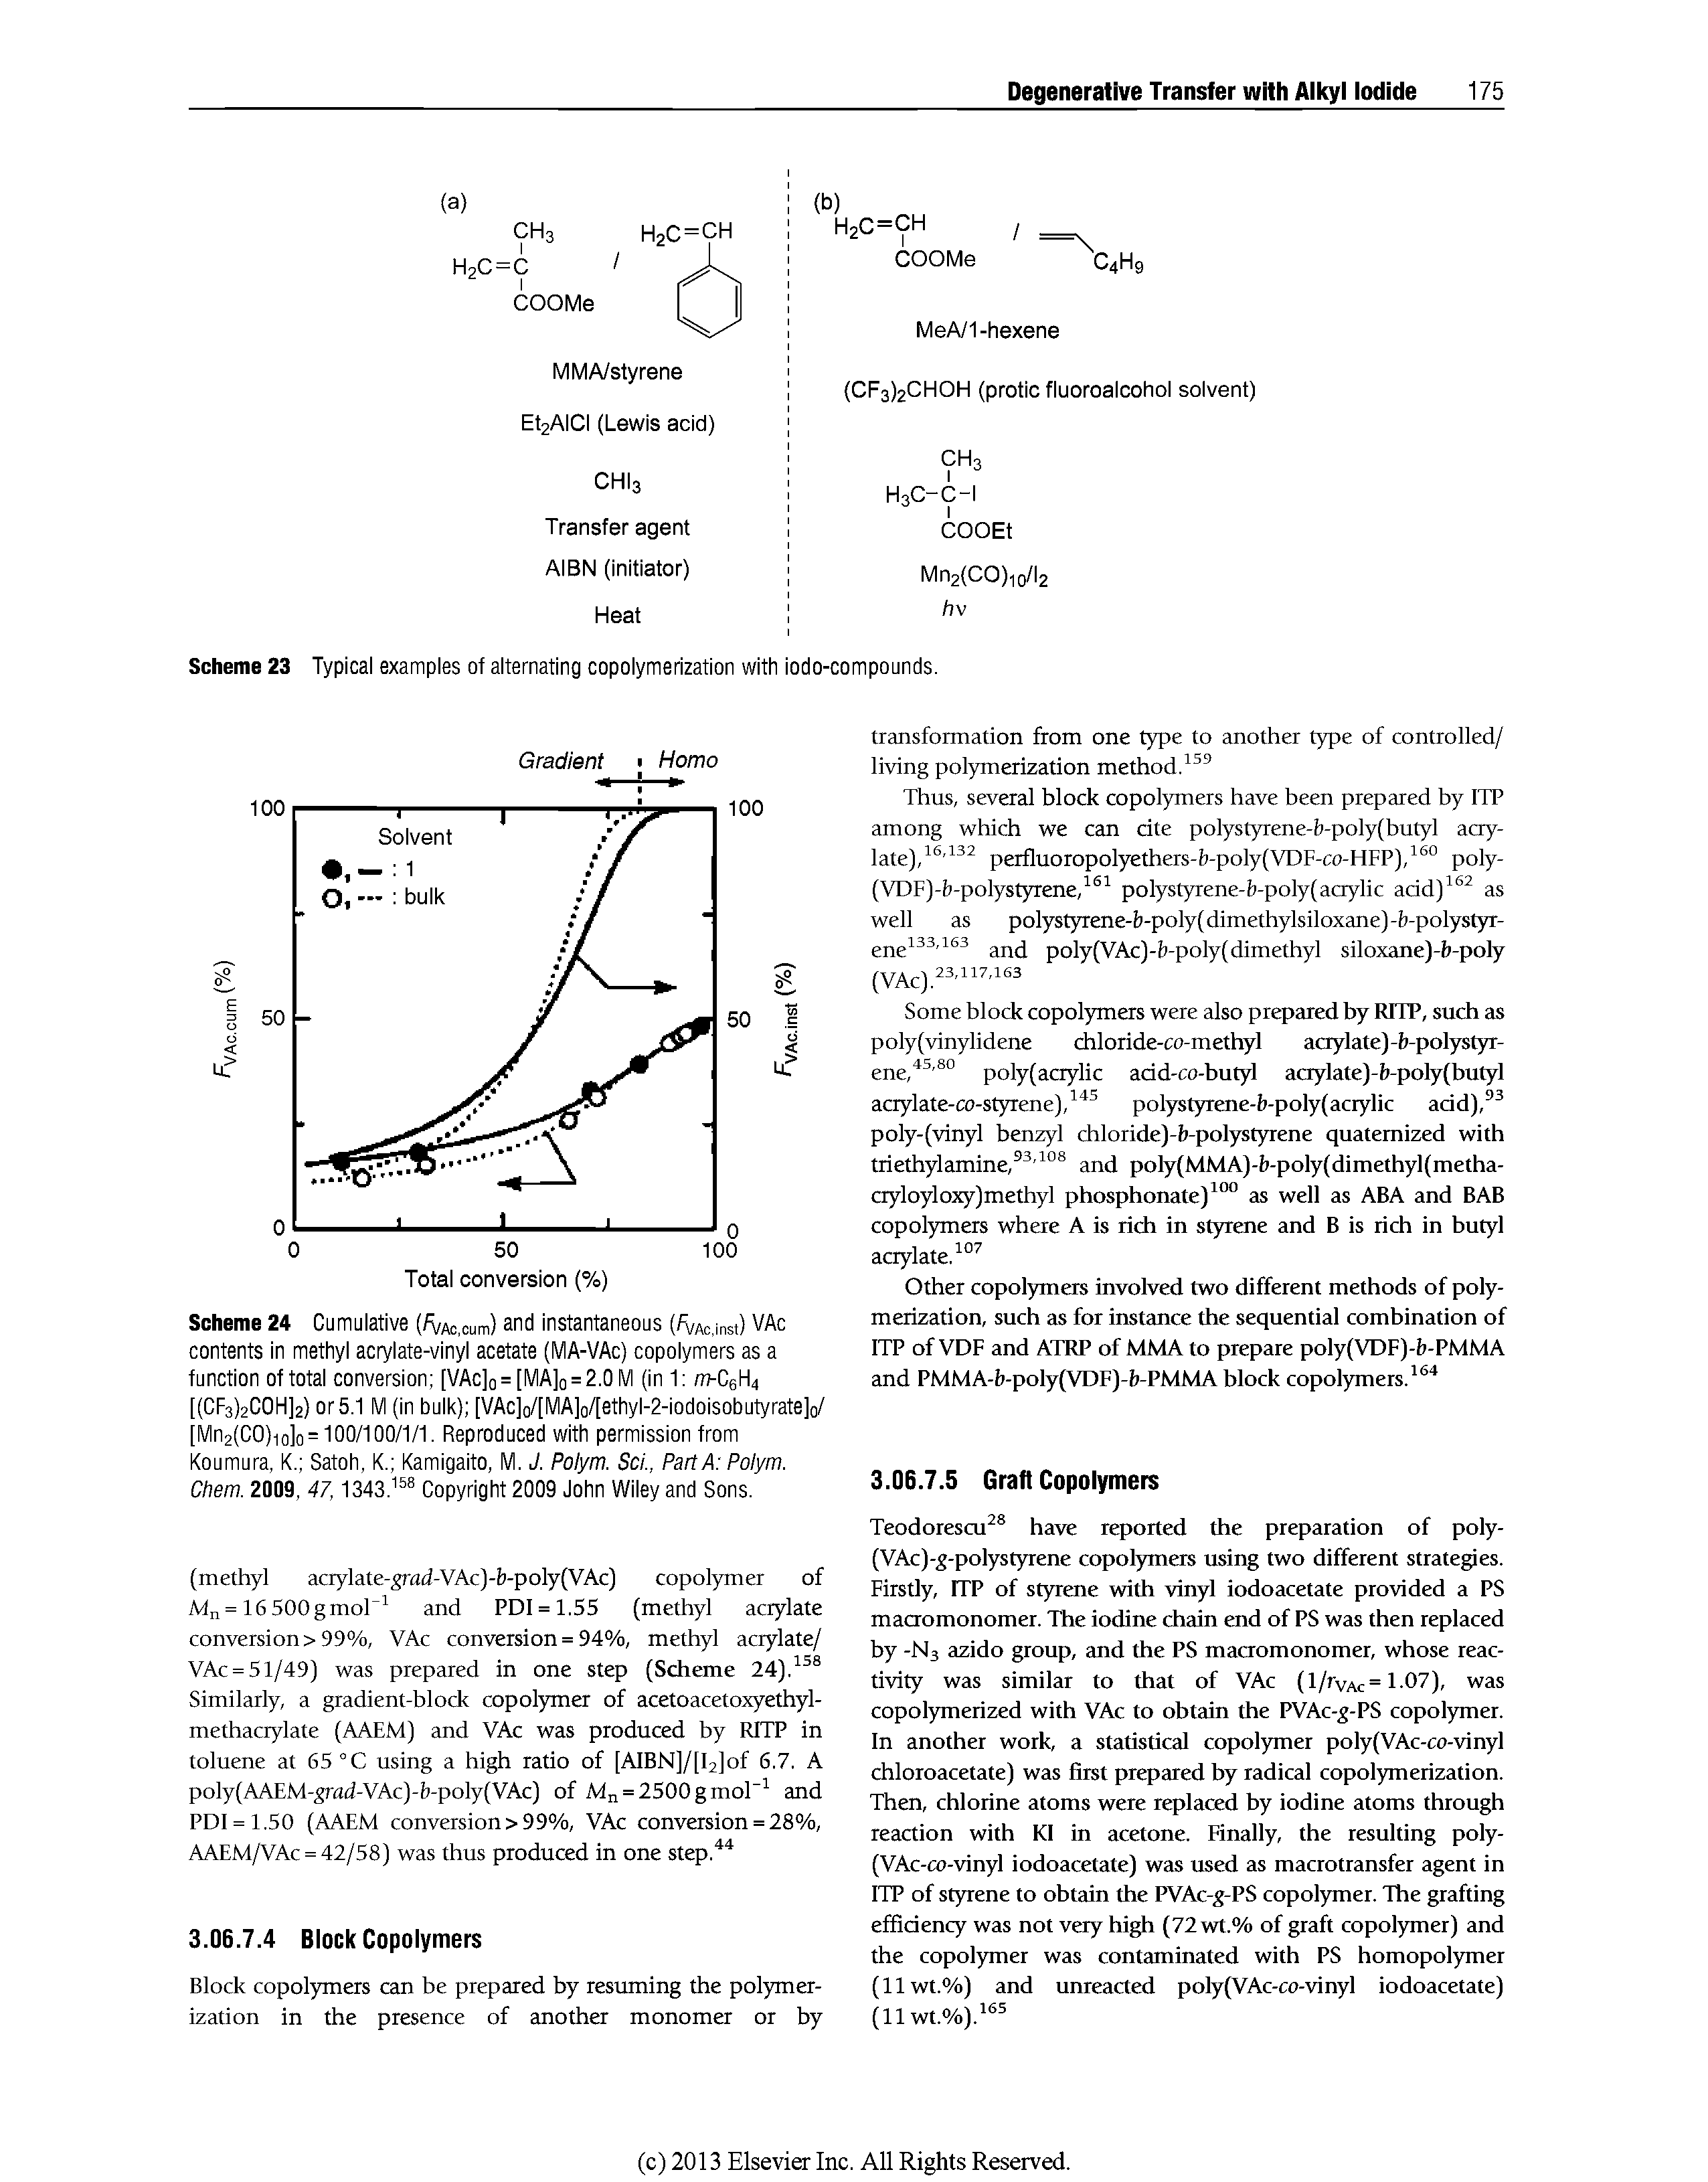 Scheme 24 Cumulative (/vAc.cum) and instantaneous (/vAcjnst) VAc contents in methyl acrylate-vinyl acetate (MA-VAc) copolymers as a function of total conversion [VAc]o = [MA]o = 2.0M (in 1 n -C6H4 [(CF3)2C0H]2) or 5.1 M (in bulk) [VAc]o/[MA]o/[ethyl-2-iodoisobutyrate]o/ [Mn2(CO)io]o = 100/100/1/1. Reproduced with permission from Koumura, K. Satoh, K. Kamigaito, M. J. Polytn. Sci., Part A Polym. Chem. 2009, 47,1343. Copyright 2009 John Wiley and Sons.